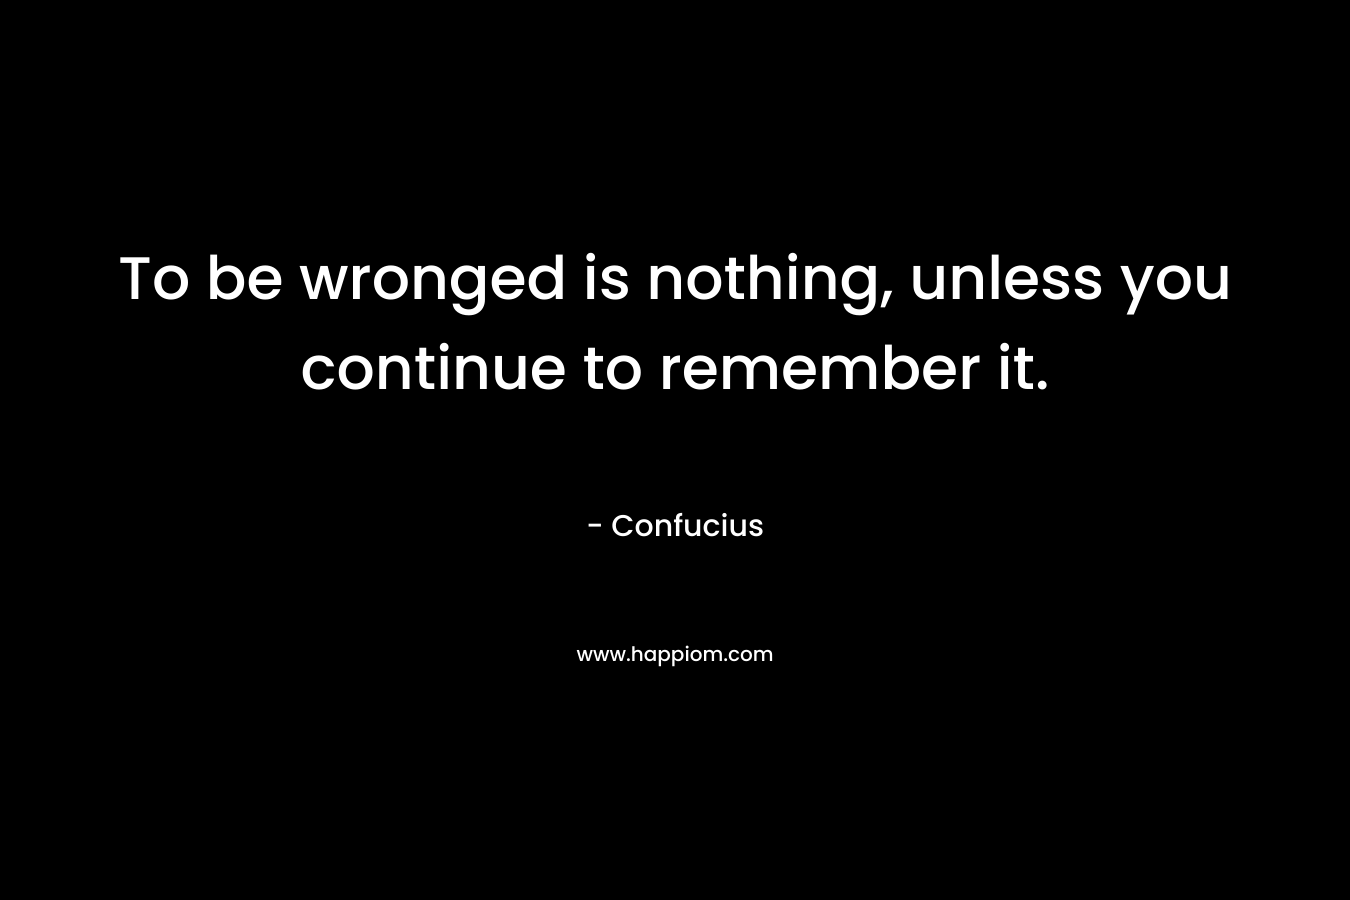 To be wronged is nothing, unless you continue to remember it.